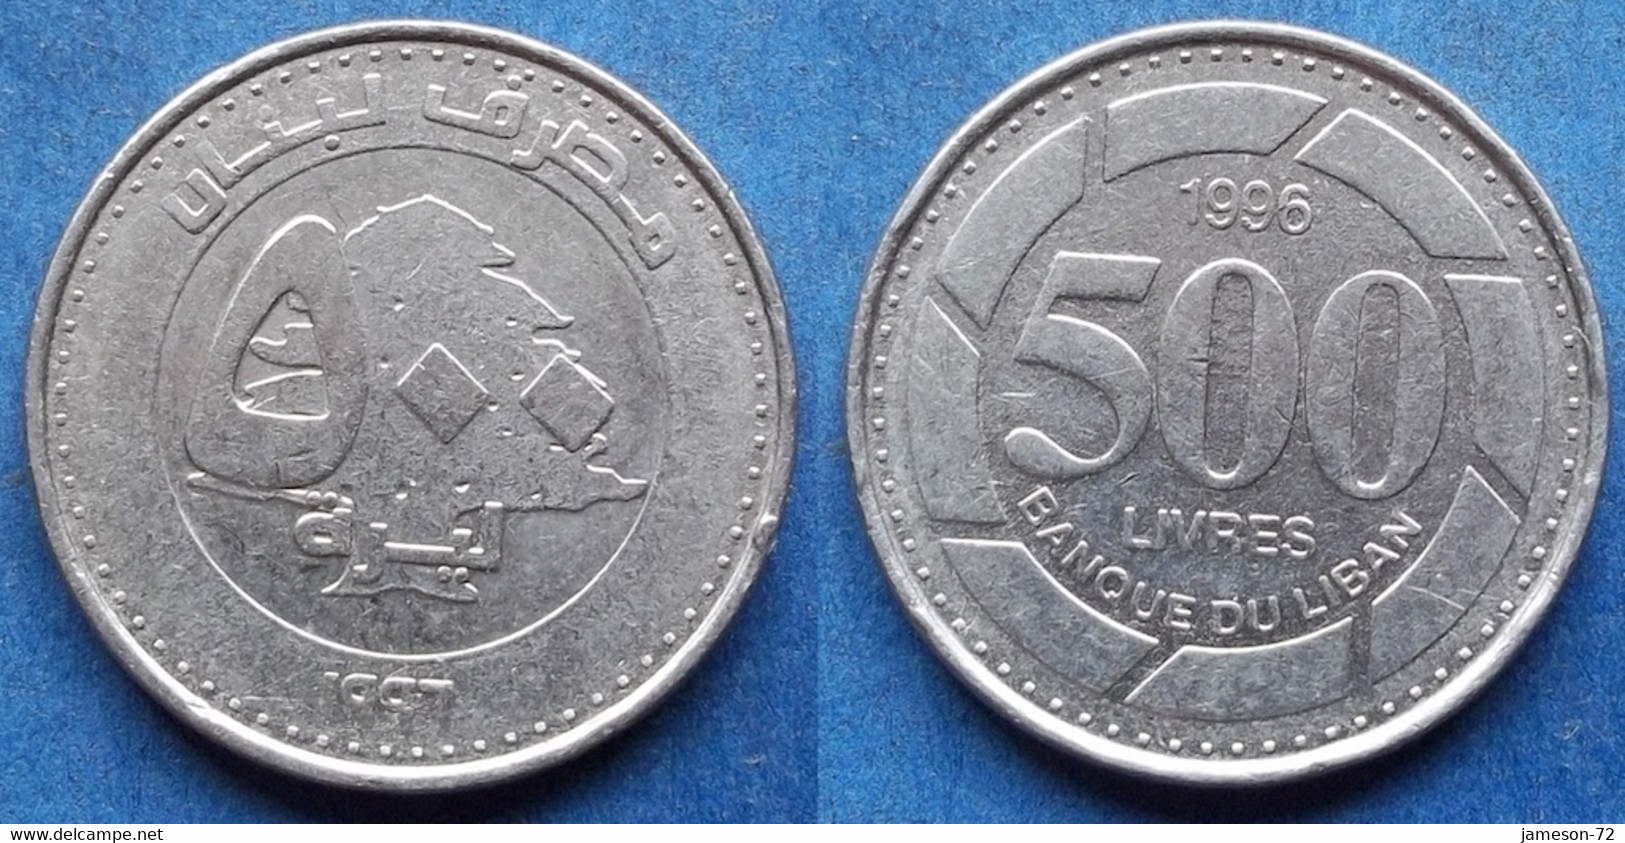 LEBANON - 500 Livres 1996 KM# 39 Independent Republic Asia - Edelweiss Coins - Libanon